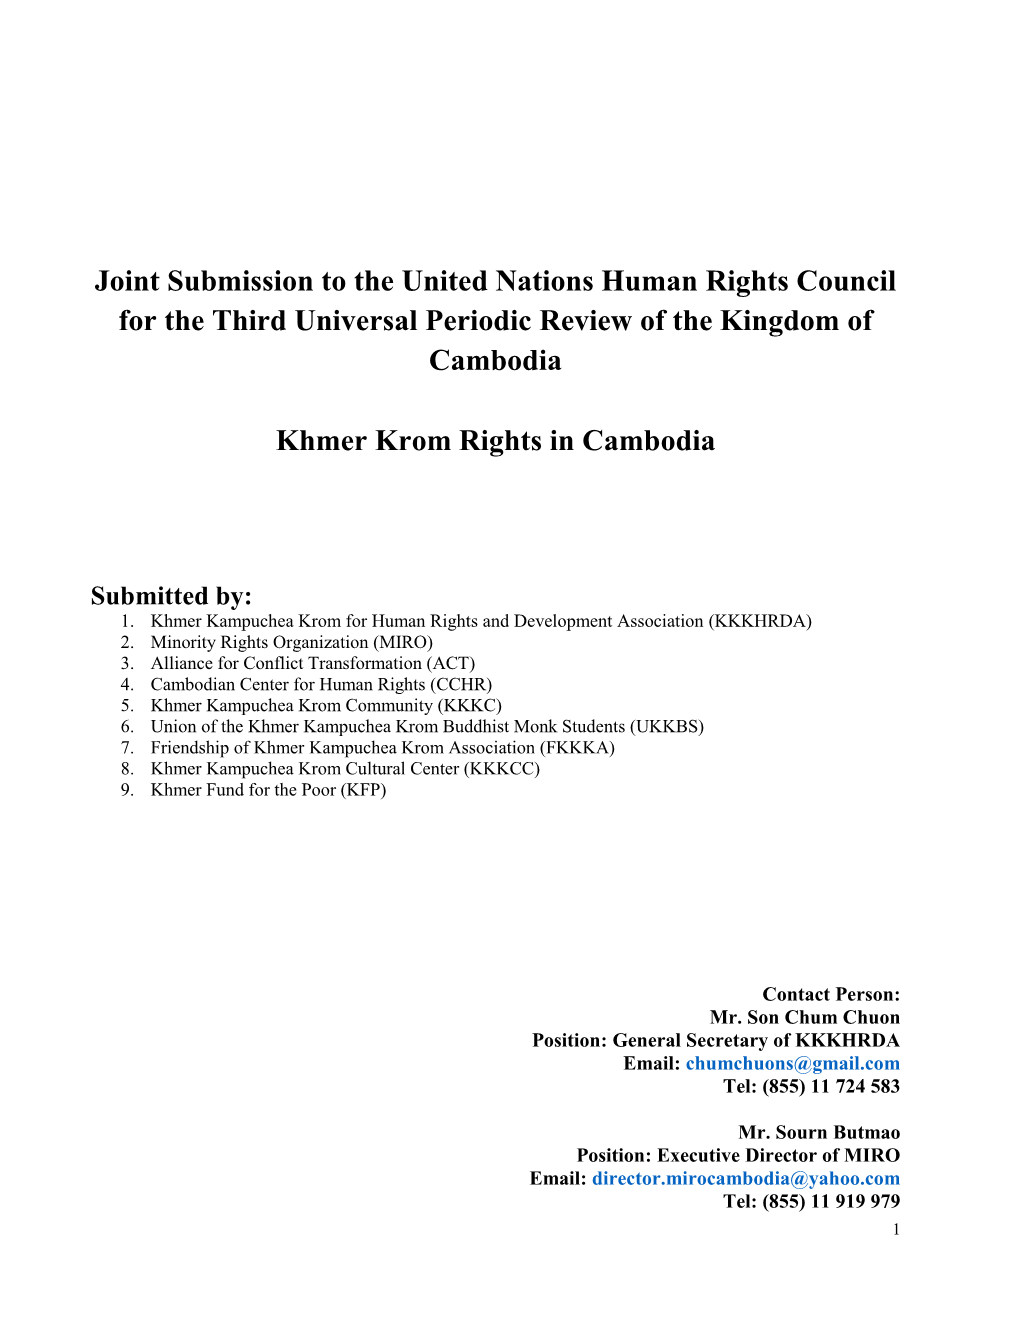 Joint Submission to the United Nations Human Rights Council for the Third Universal Periodic Review of the Kingdom of Cambodia